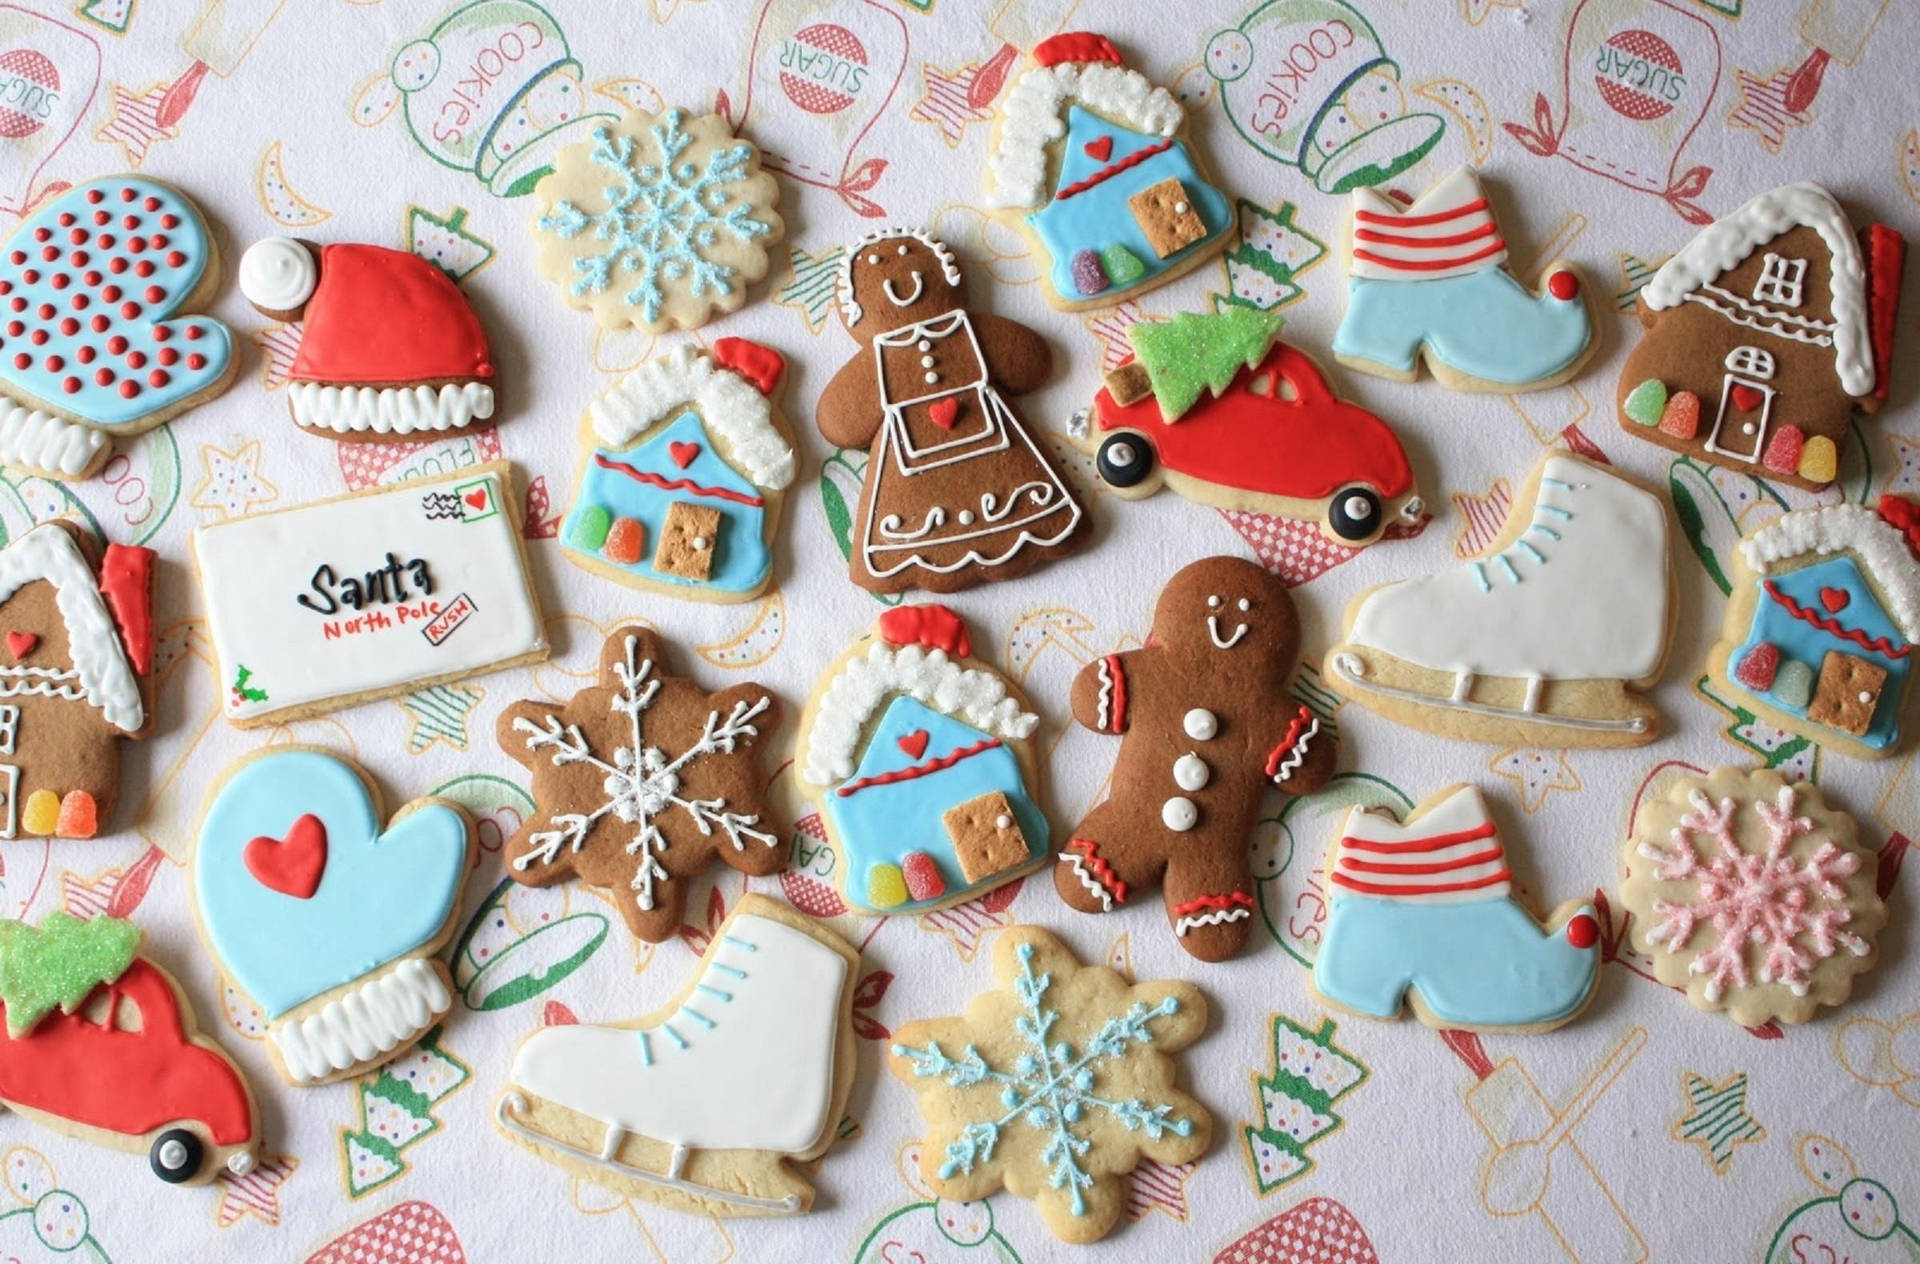 New Year's Festive Cookies And Candies